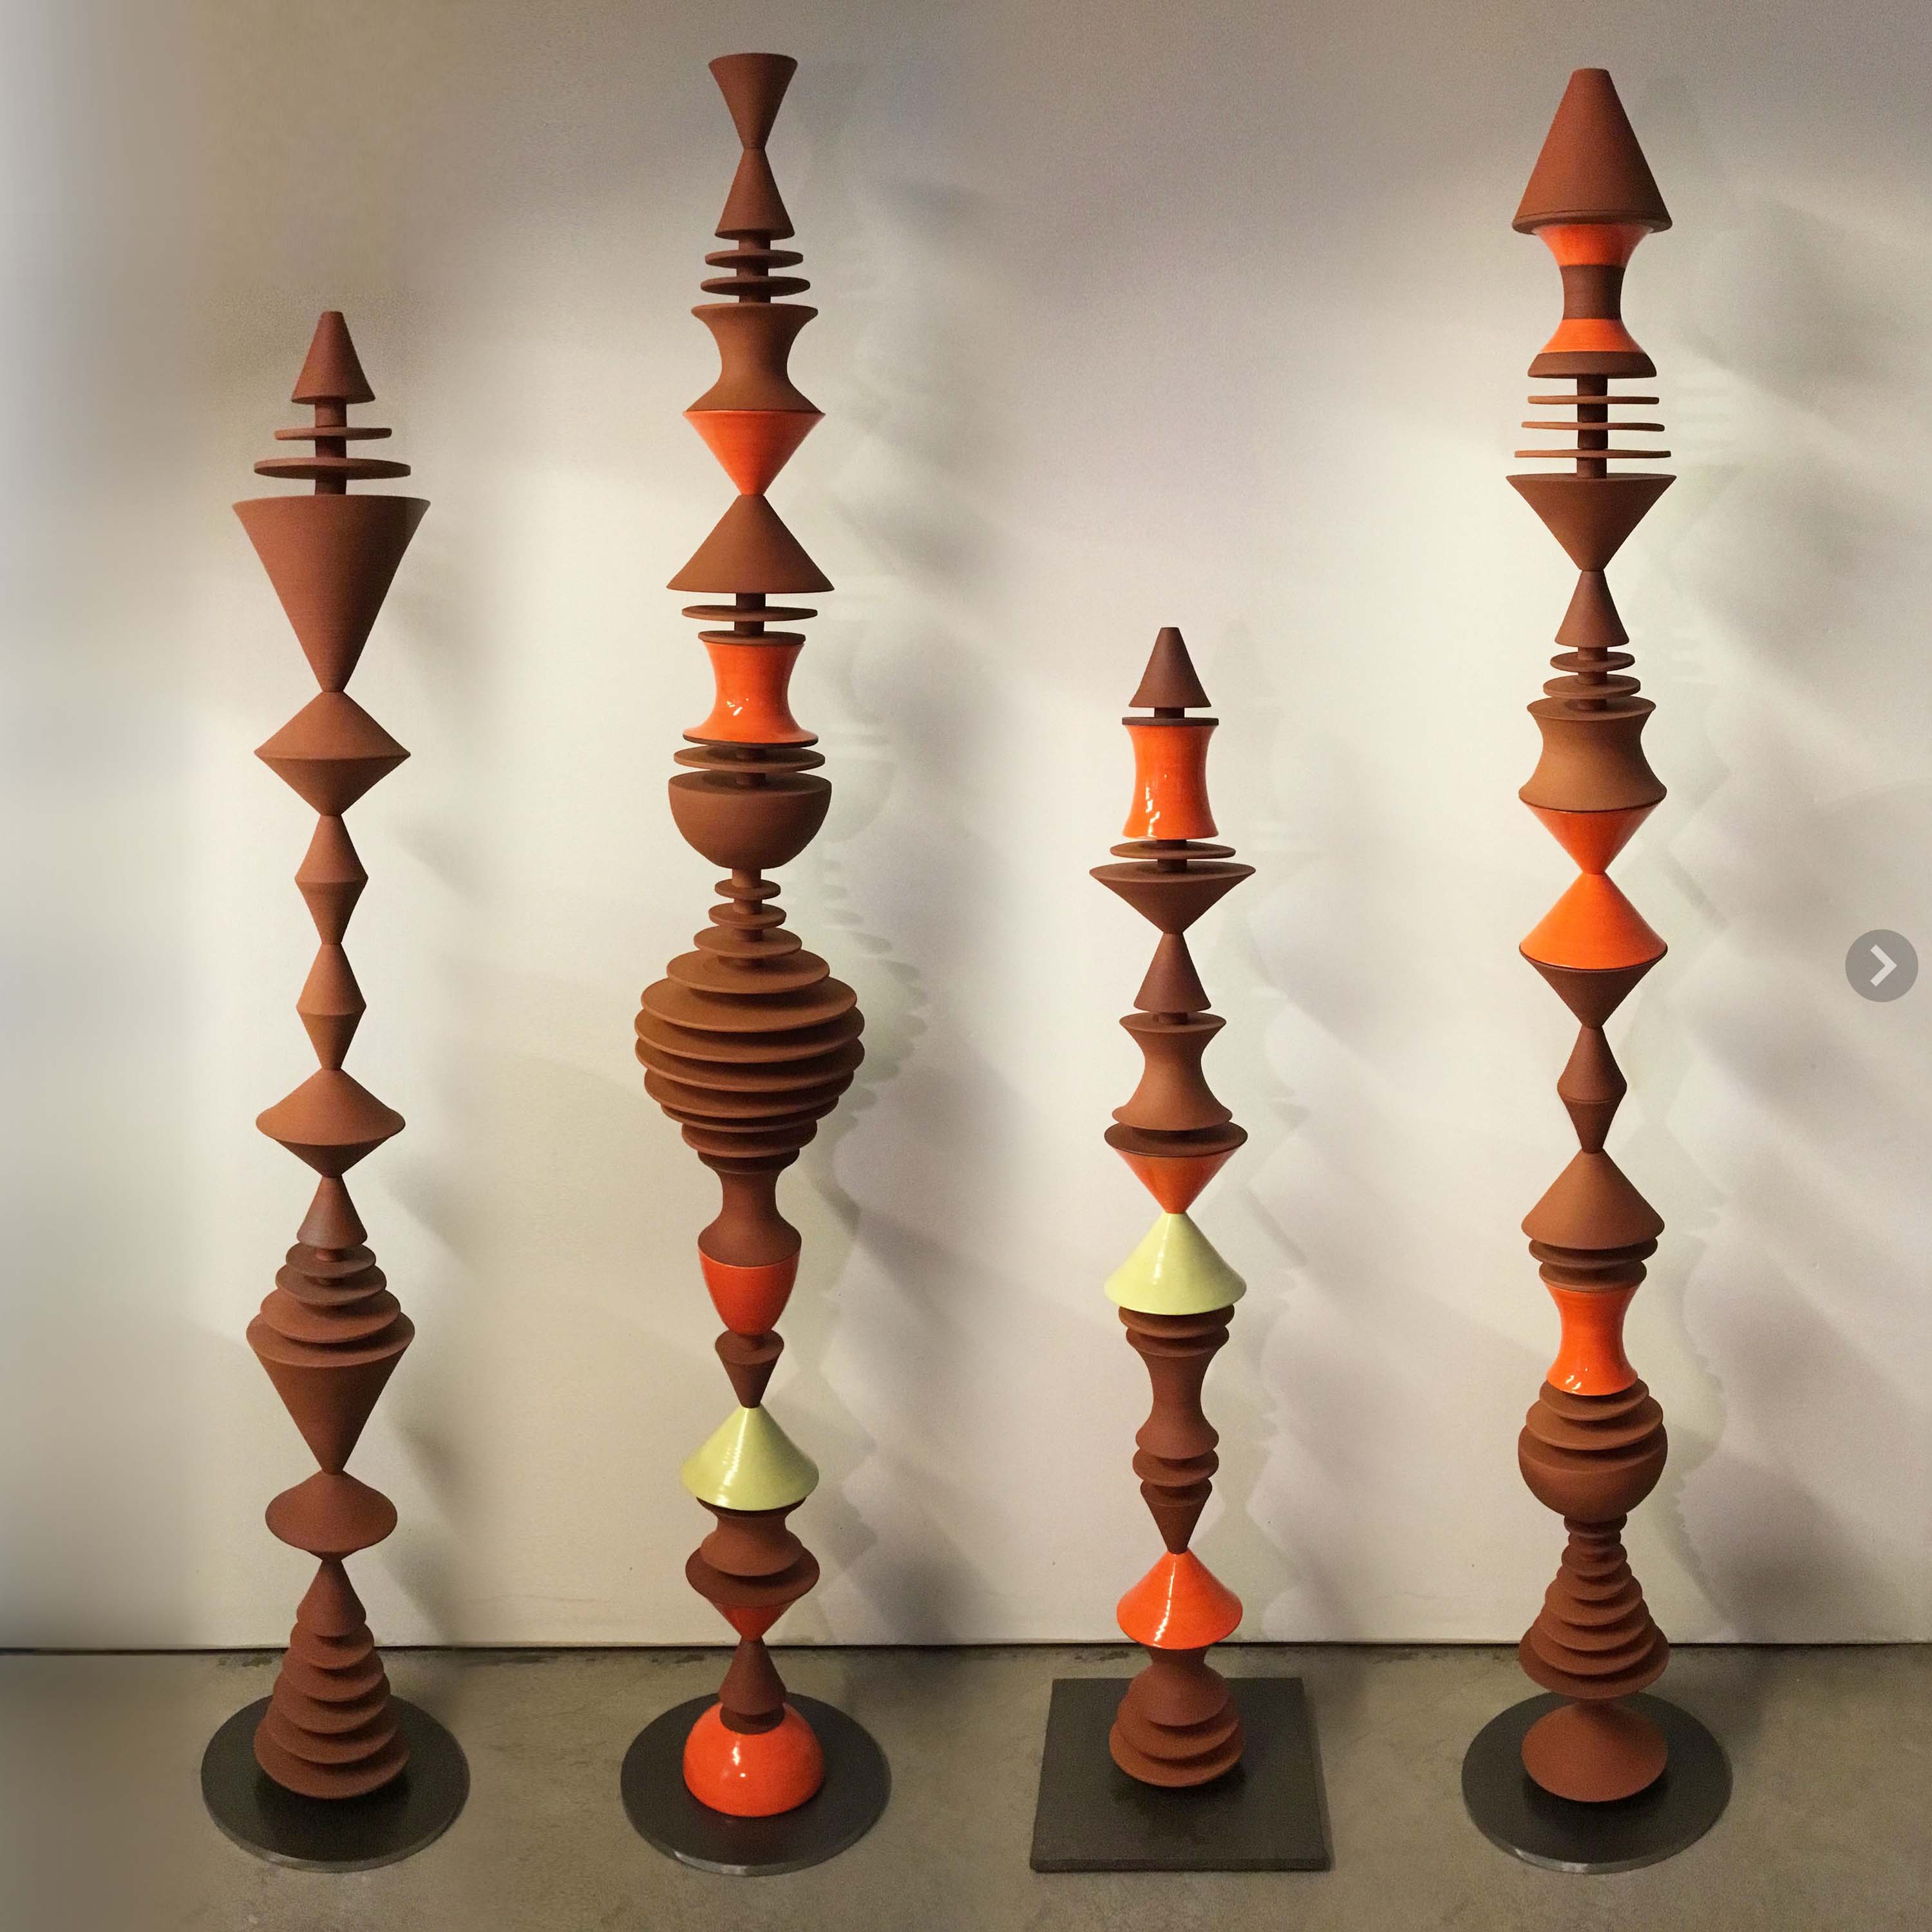 Ceramic sculptures, composed from modular handmade pieces. With a nod to mid-century modern, the geometric forms repeat playfully, complementing modern interiors and architecture. 11 to 60 inches tall, stoneware, pottery decor.